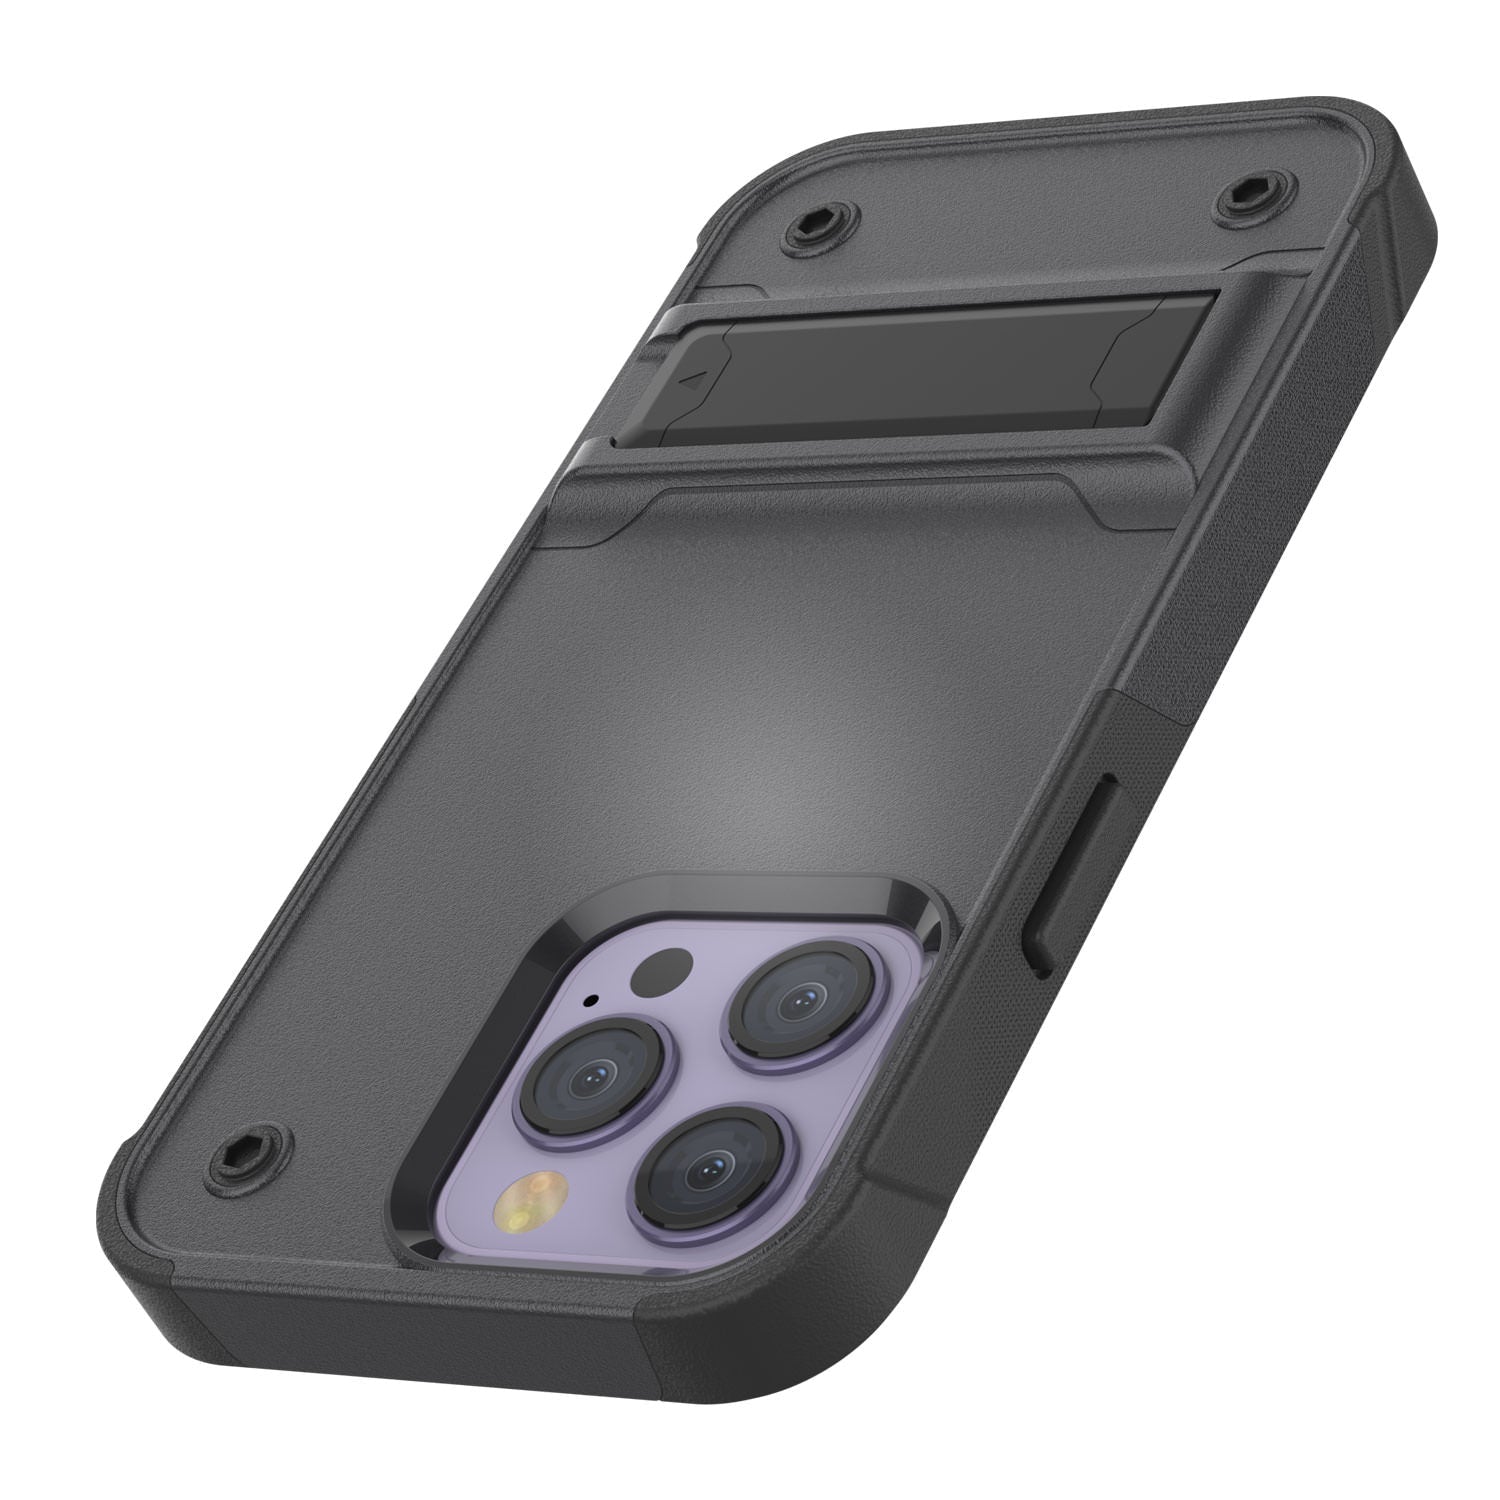 Punkcase iPhone 14 Pro Max Case [Reliance Series] Protective Hybrid Military Grade Cover W/Built-in Kickstand [Grey-Black]